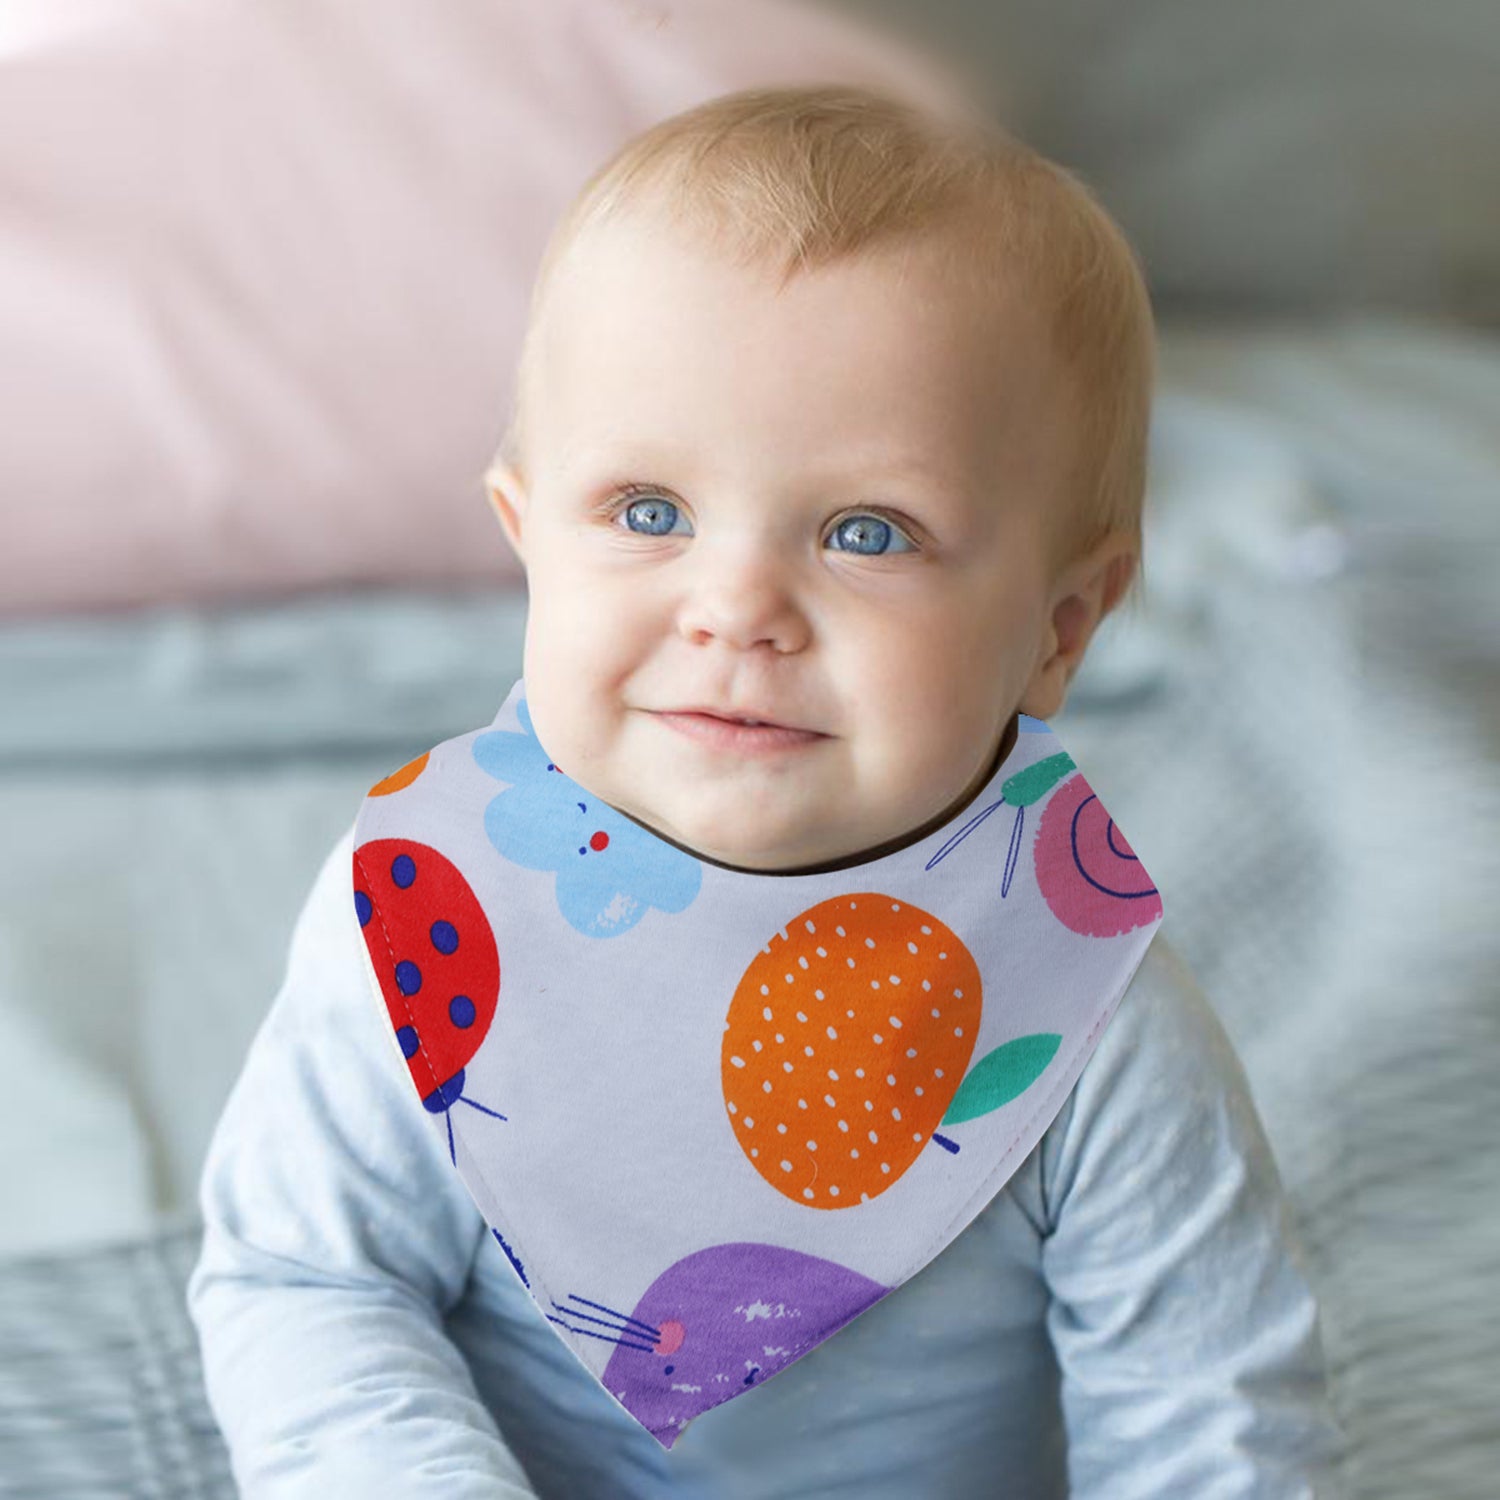 Baby Moo Just Like Mommy Daddy Cotton 3 Pack Bandana Bibs - Multicolour - Baby Moo